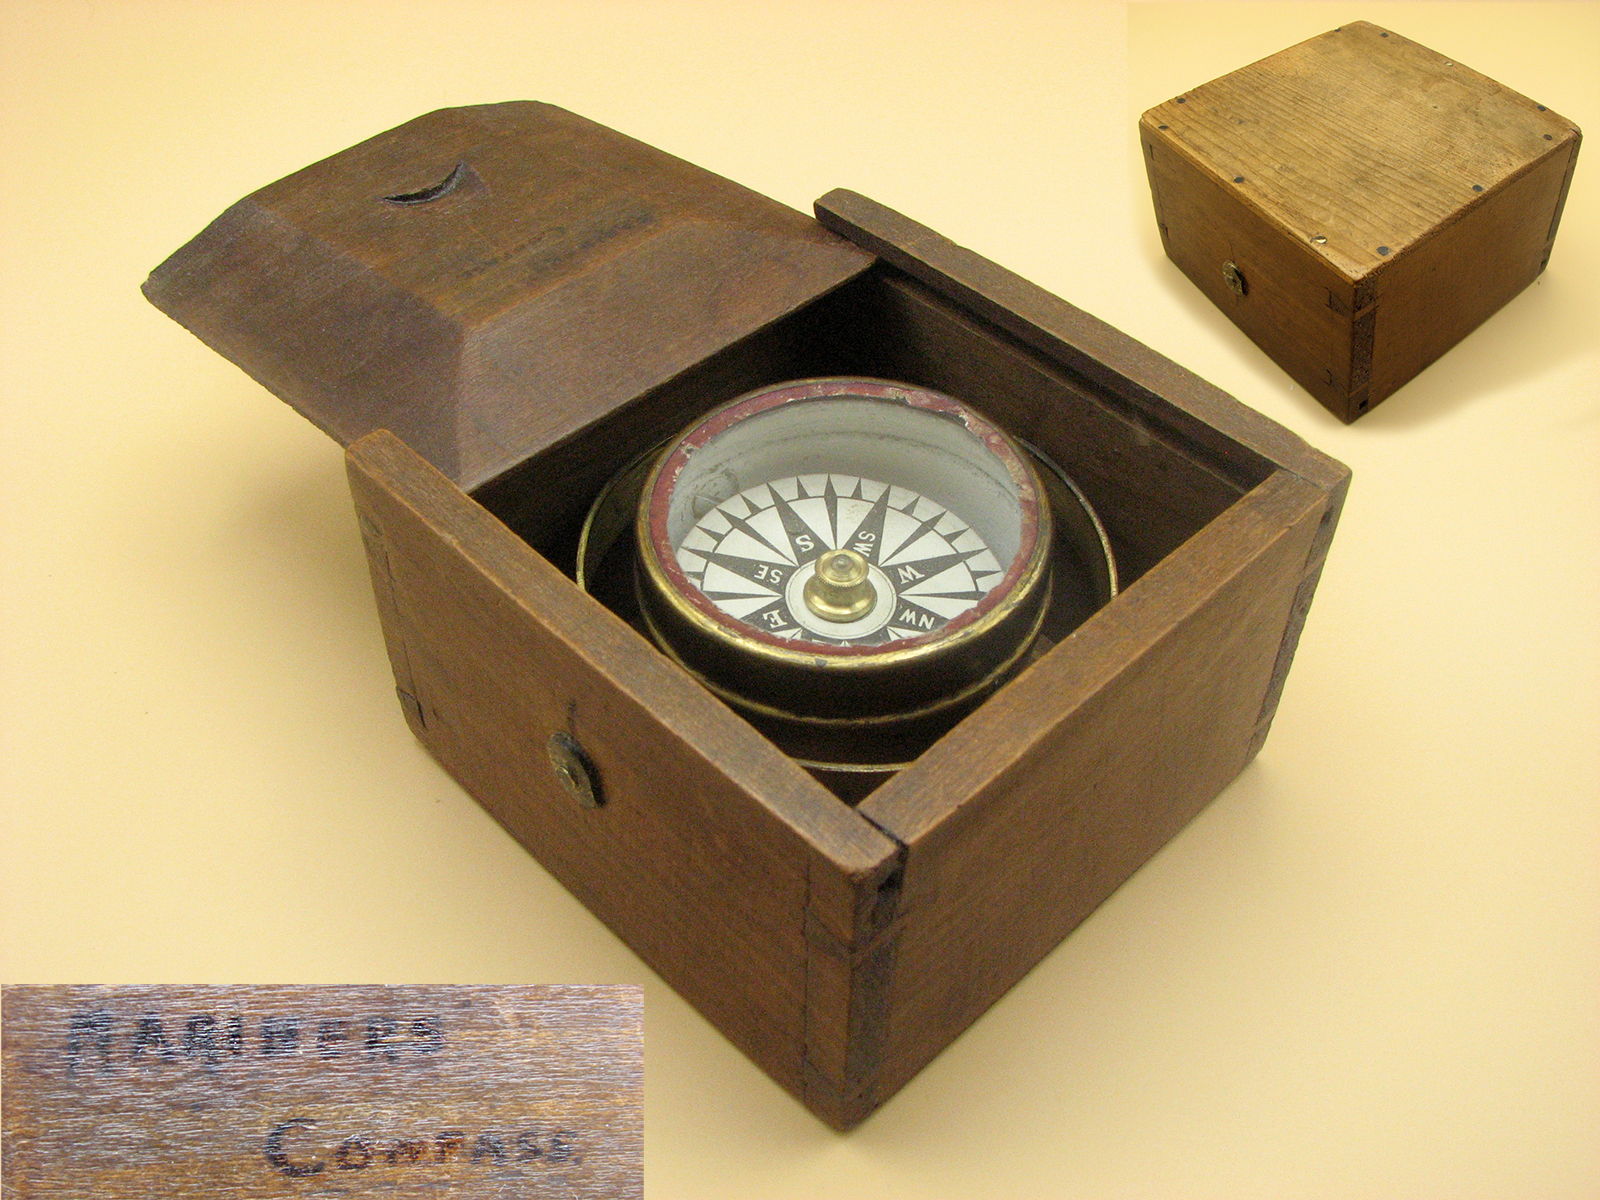 19th century ships gimbal mounted compass in mahogany case